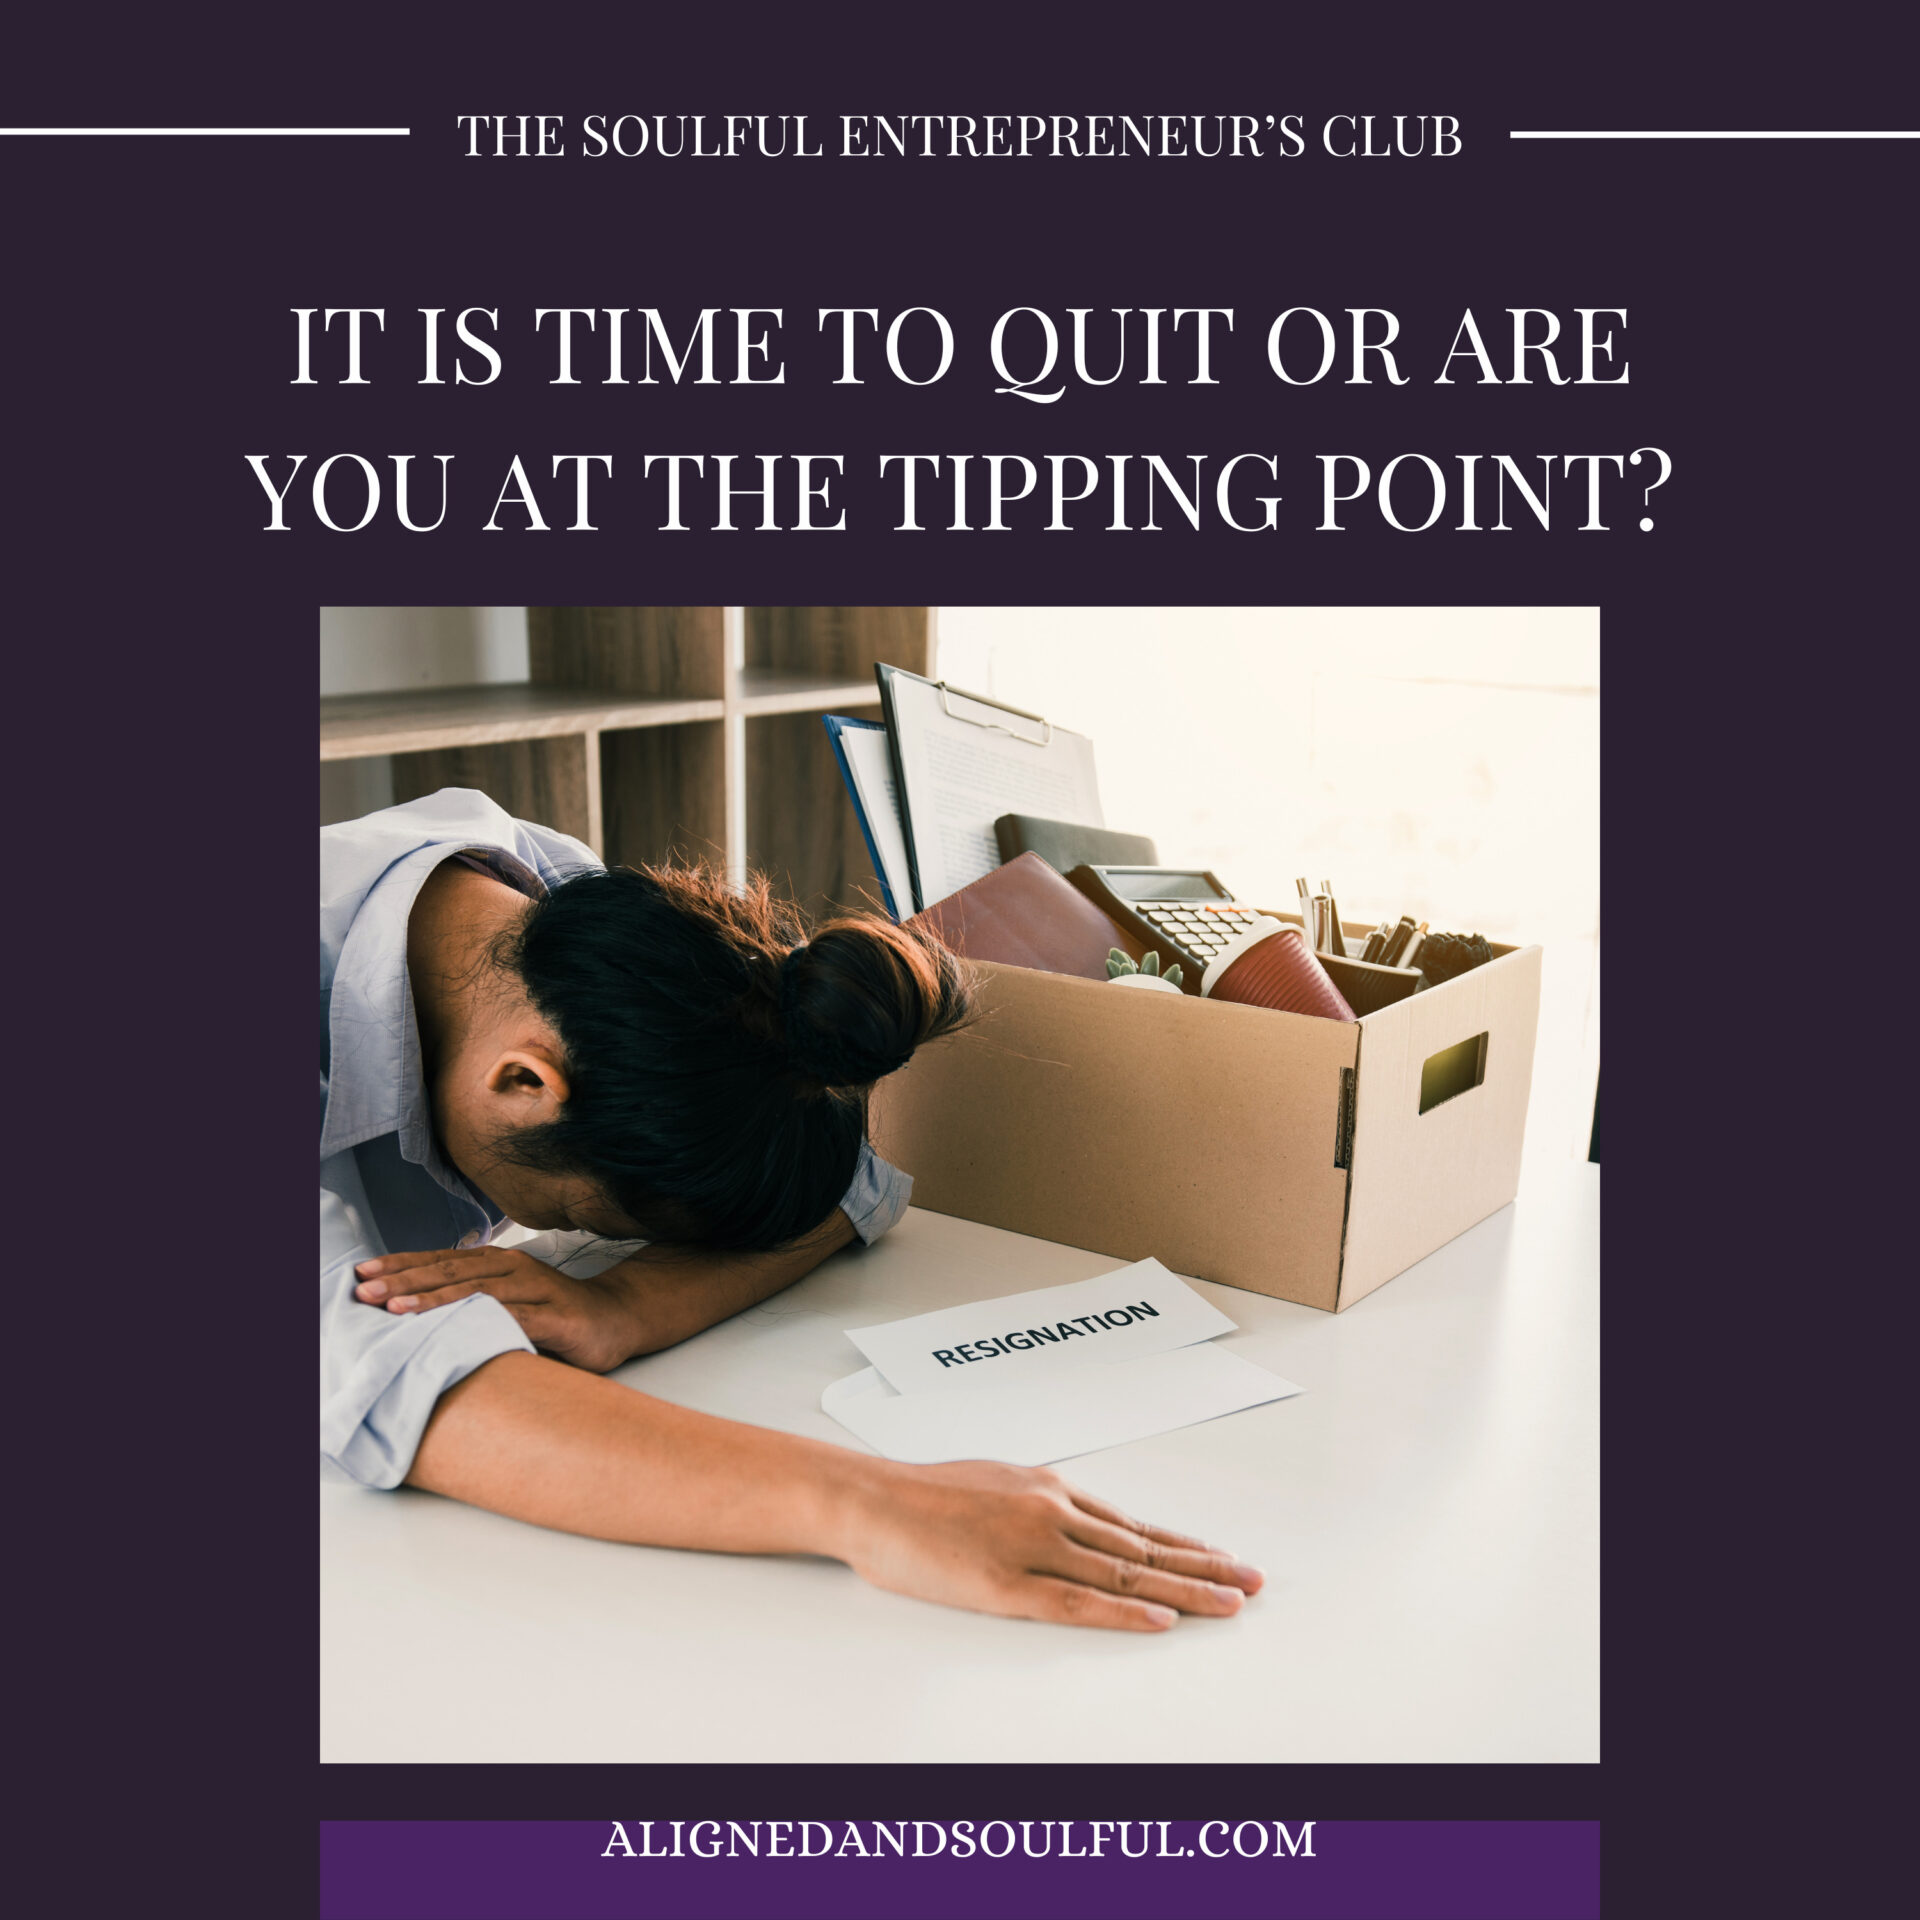 It is time to quit or are you at the Tipping Point?